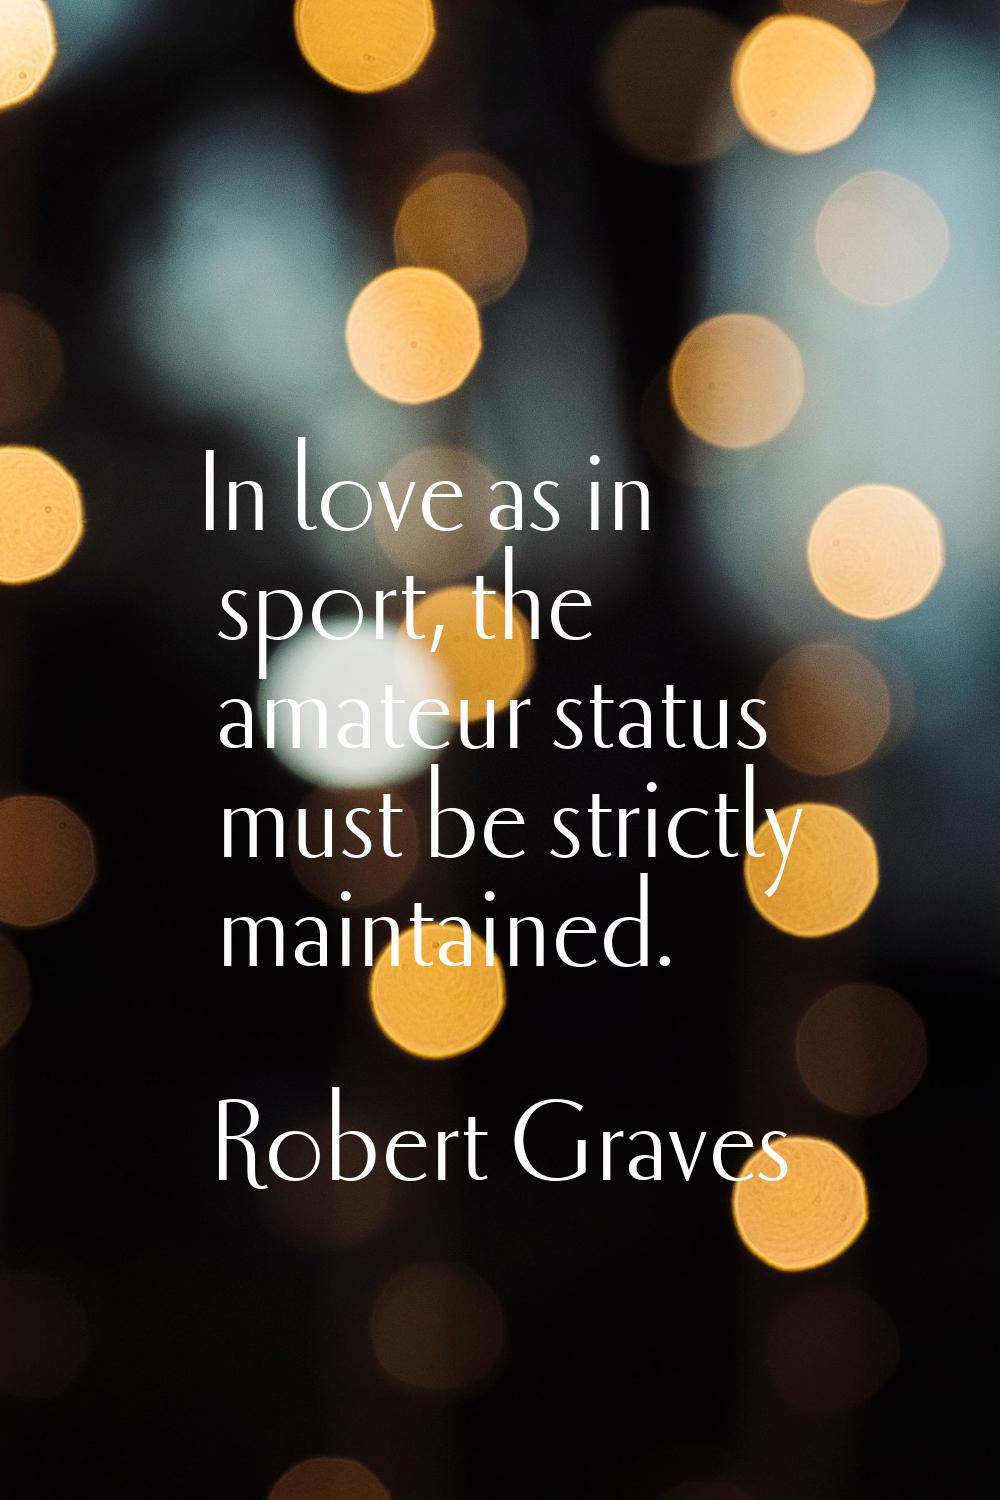 In love as in sport, the amateur status must be strictly maintained.